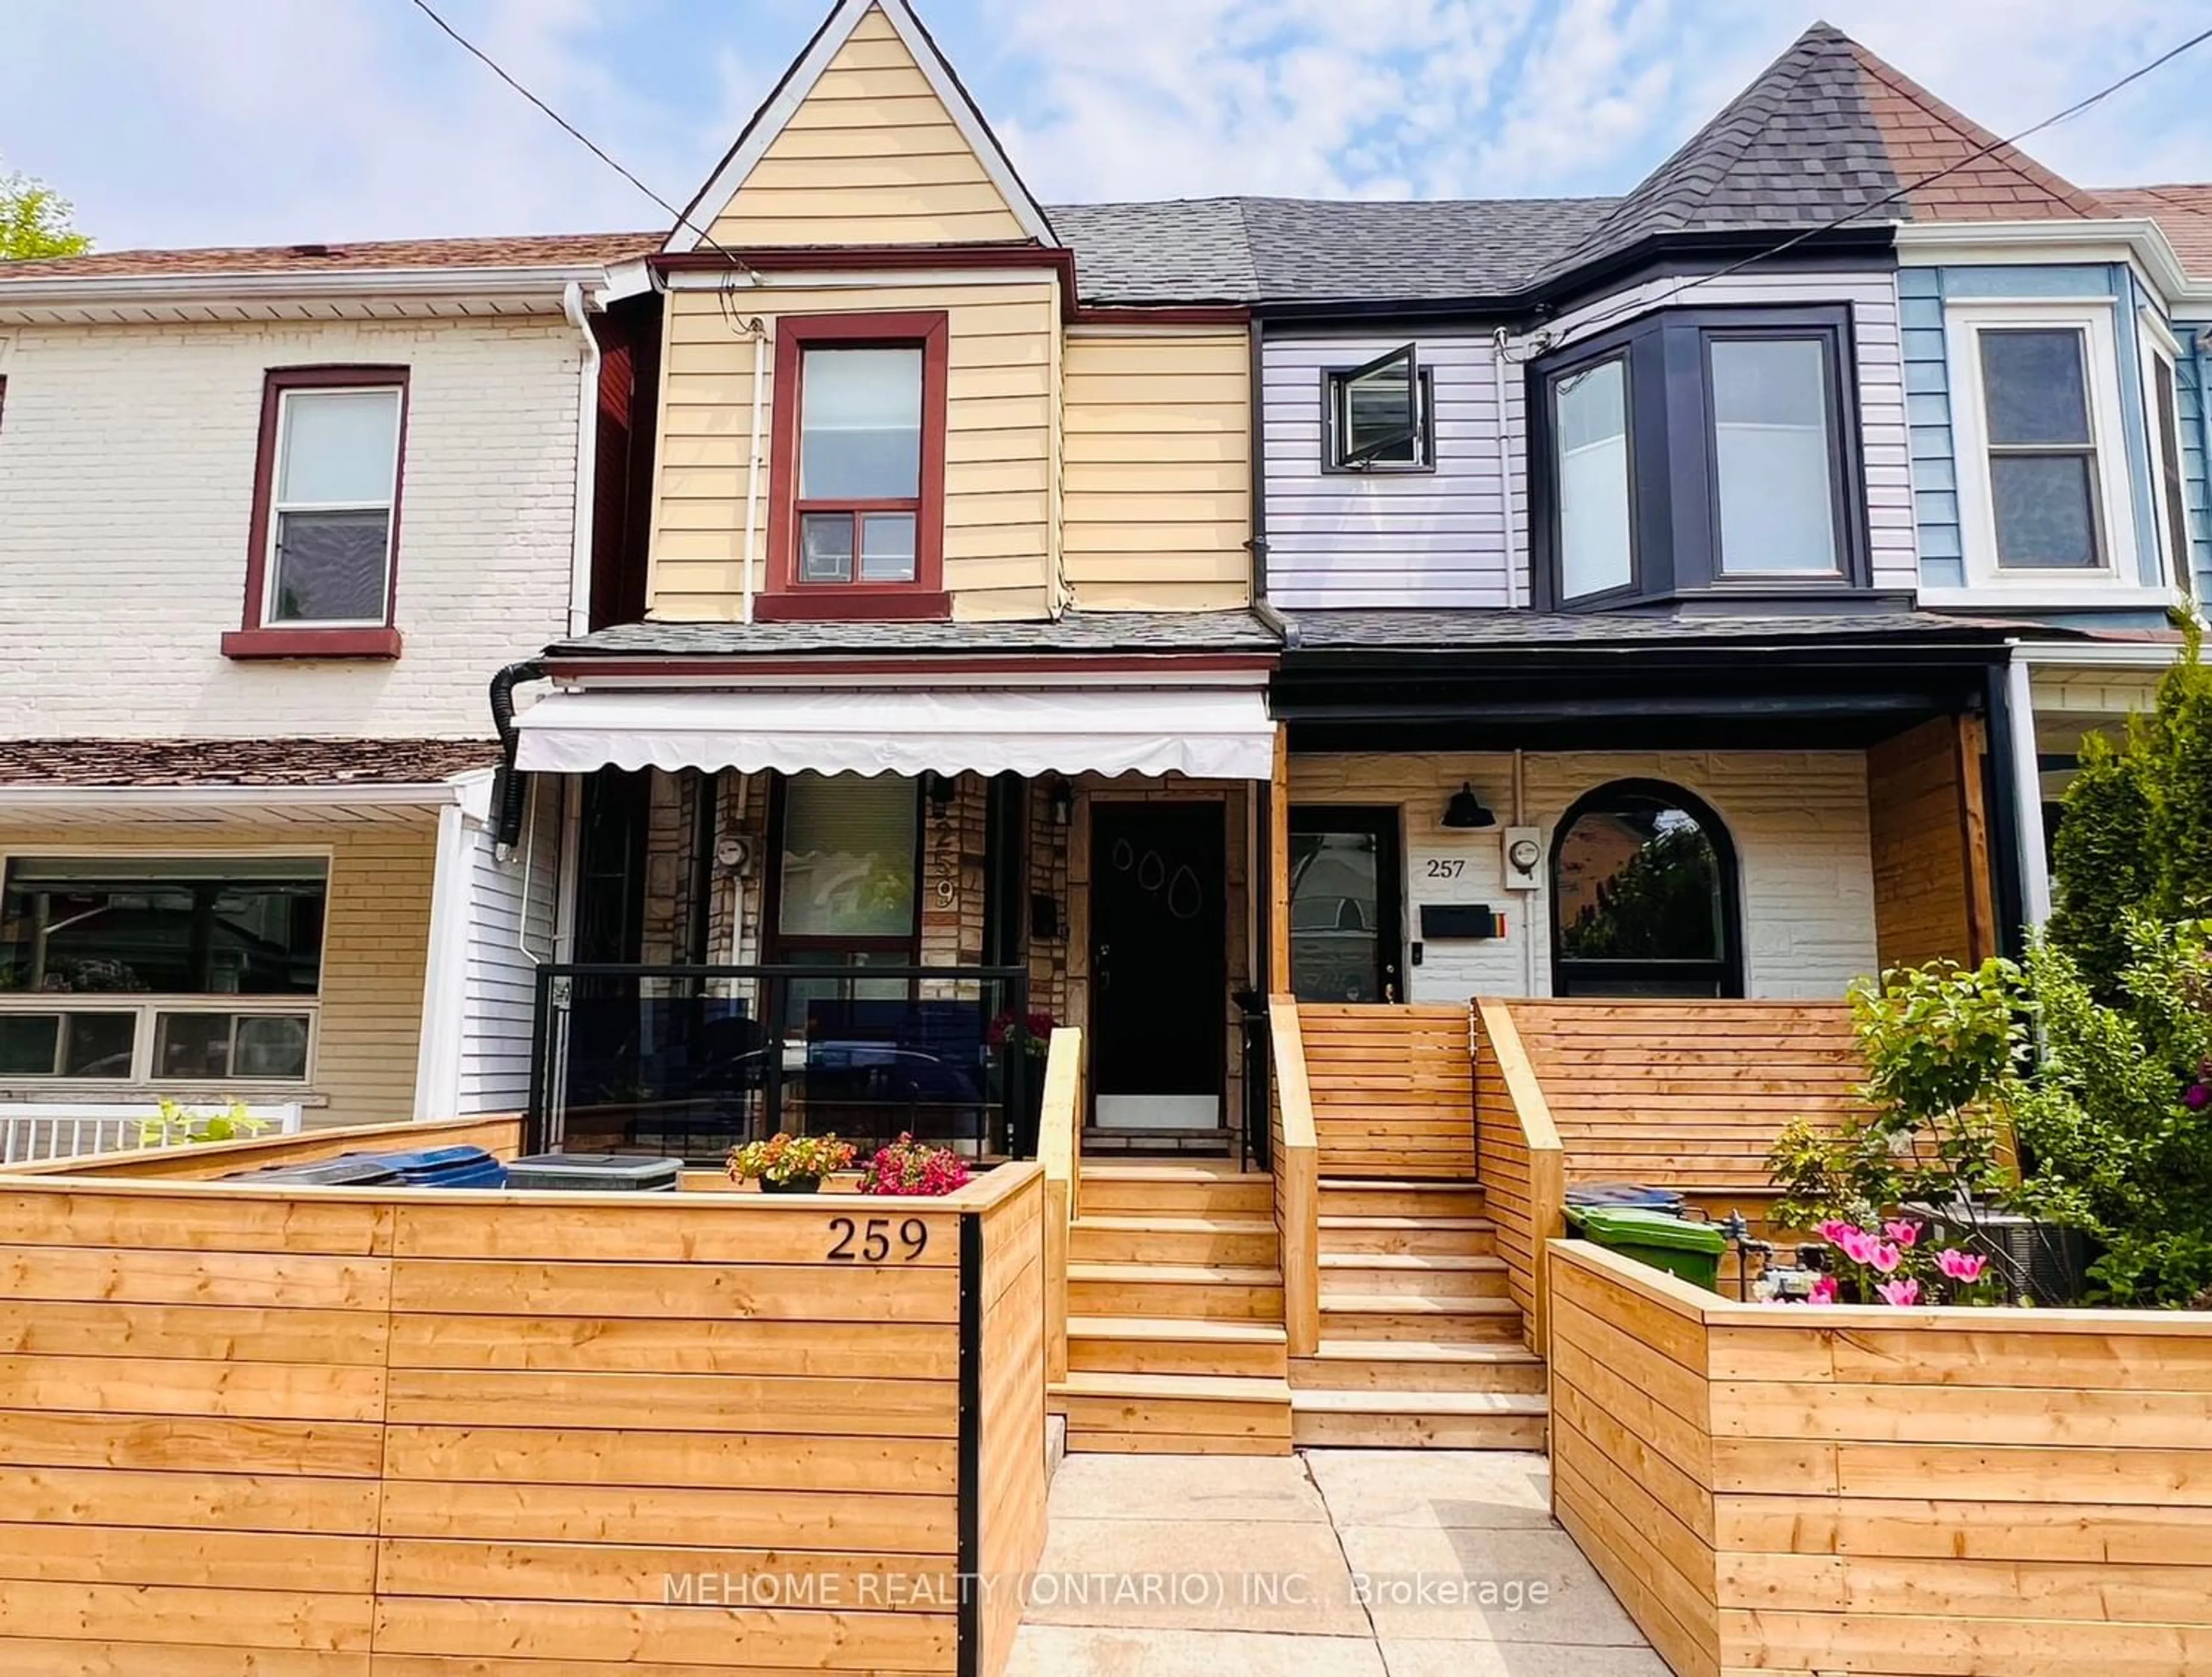 Home with vinyl exterior material for 259 Claremont St, Toronto Ontario M6J 2N1